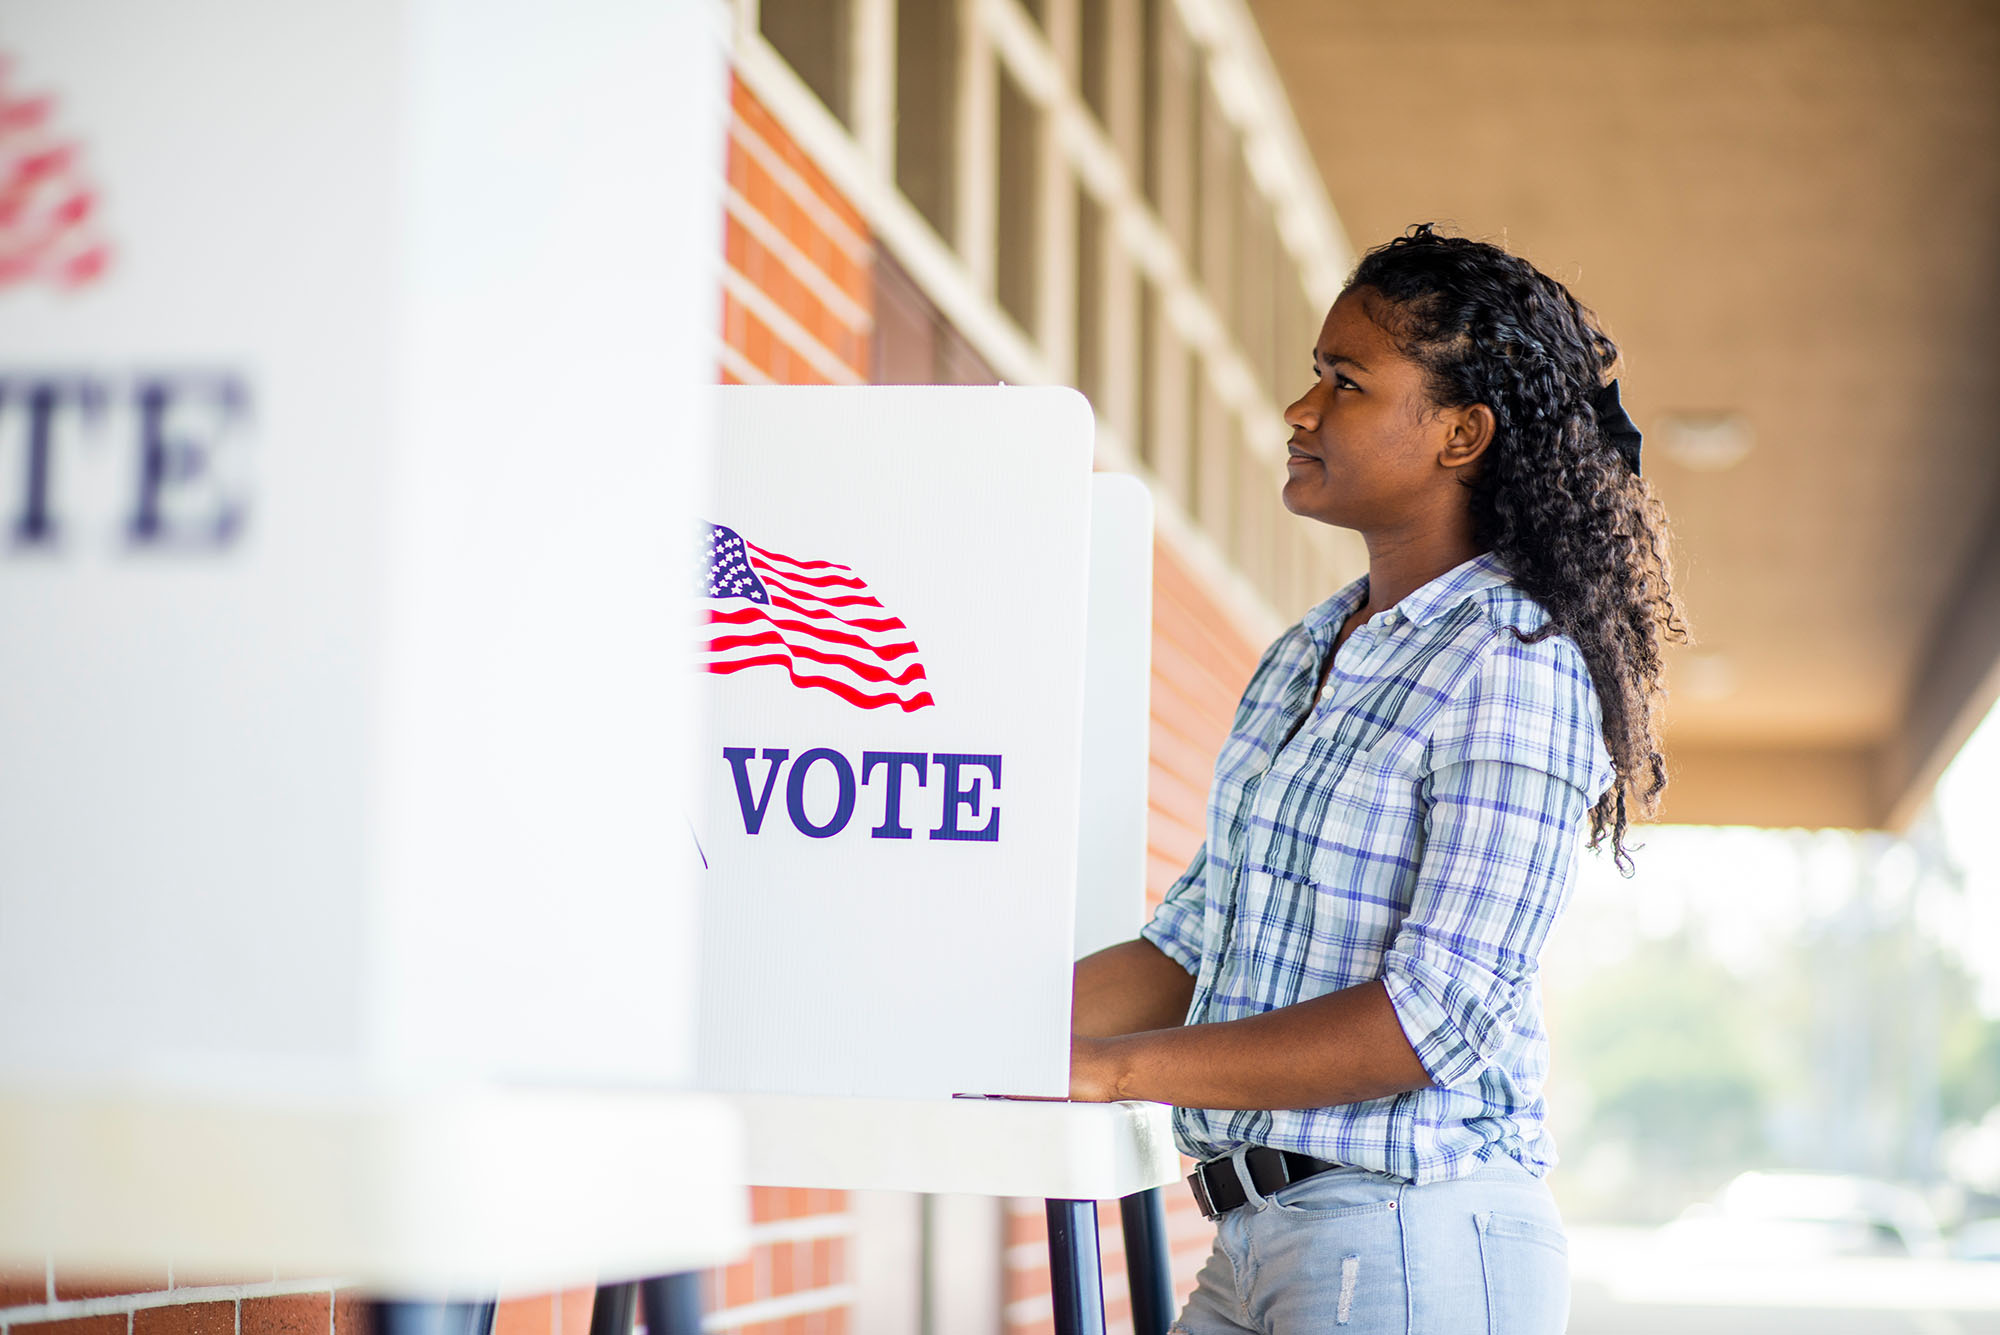 Photo of a young black girl voting on election day. A young black girl with curly hair votes in a voting booth set up outside a brick building.